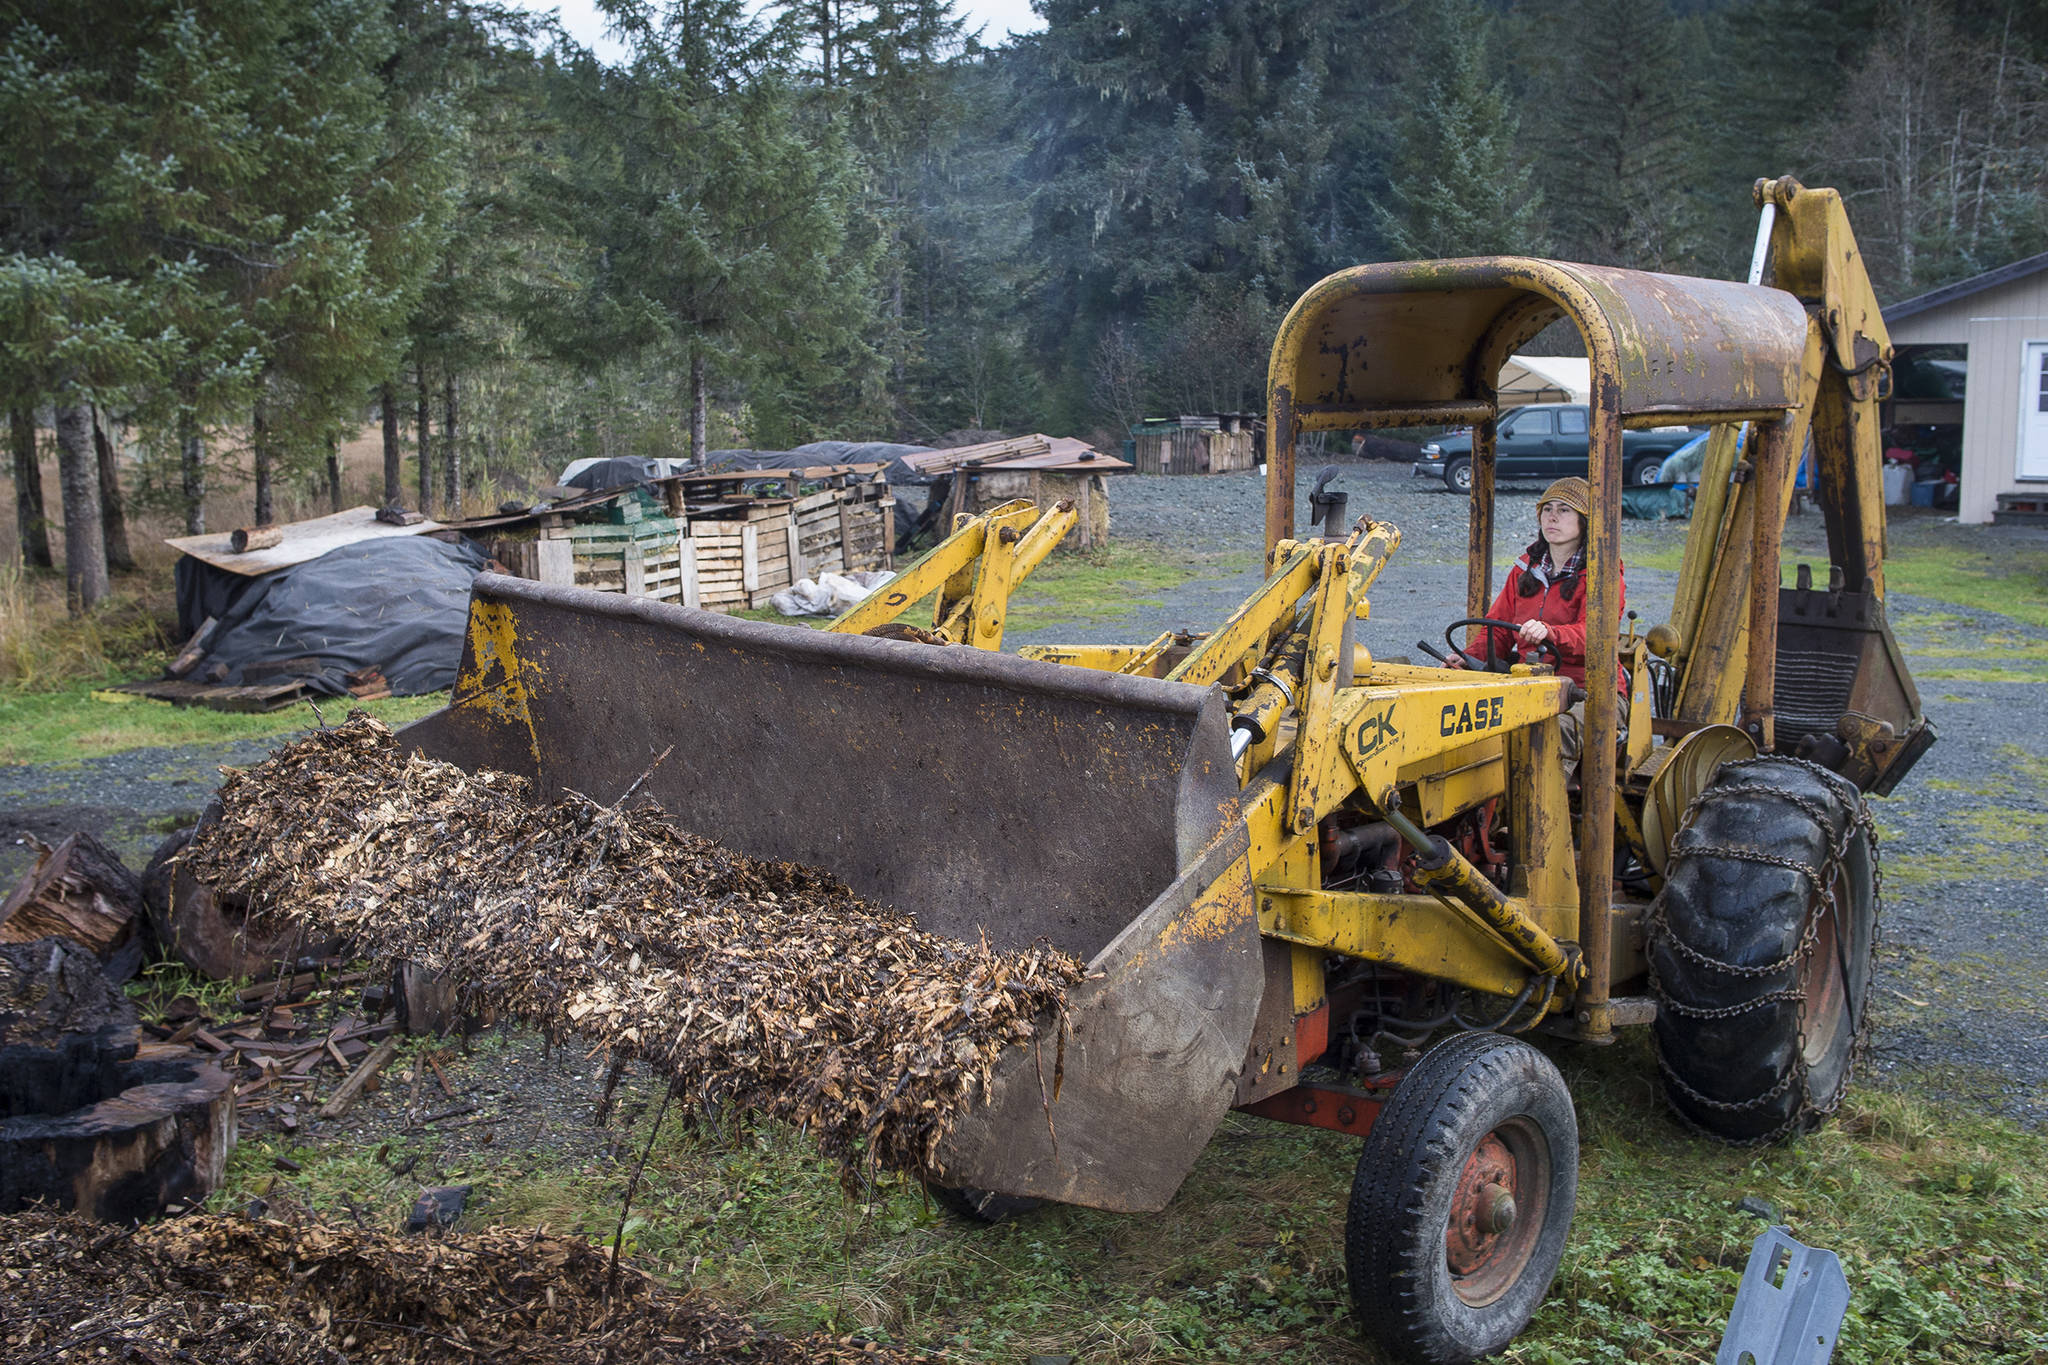 Lisa Daugherty, owner of Juneau Composts!, uses a front-end loader to move wood chips to used in her year-old business on Wednesday, Oct. 24, 2018. Currently located out the road near mile 25, Daugherty is working to lease city land in the Lemon Creek area to expand her business. (Michael Penn | Juneau Empire)